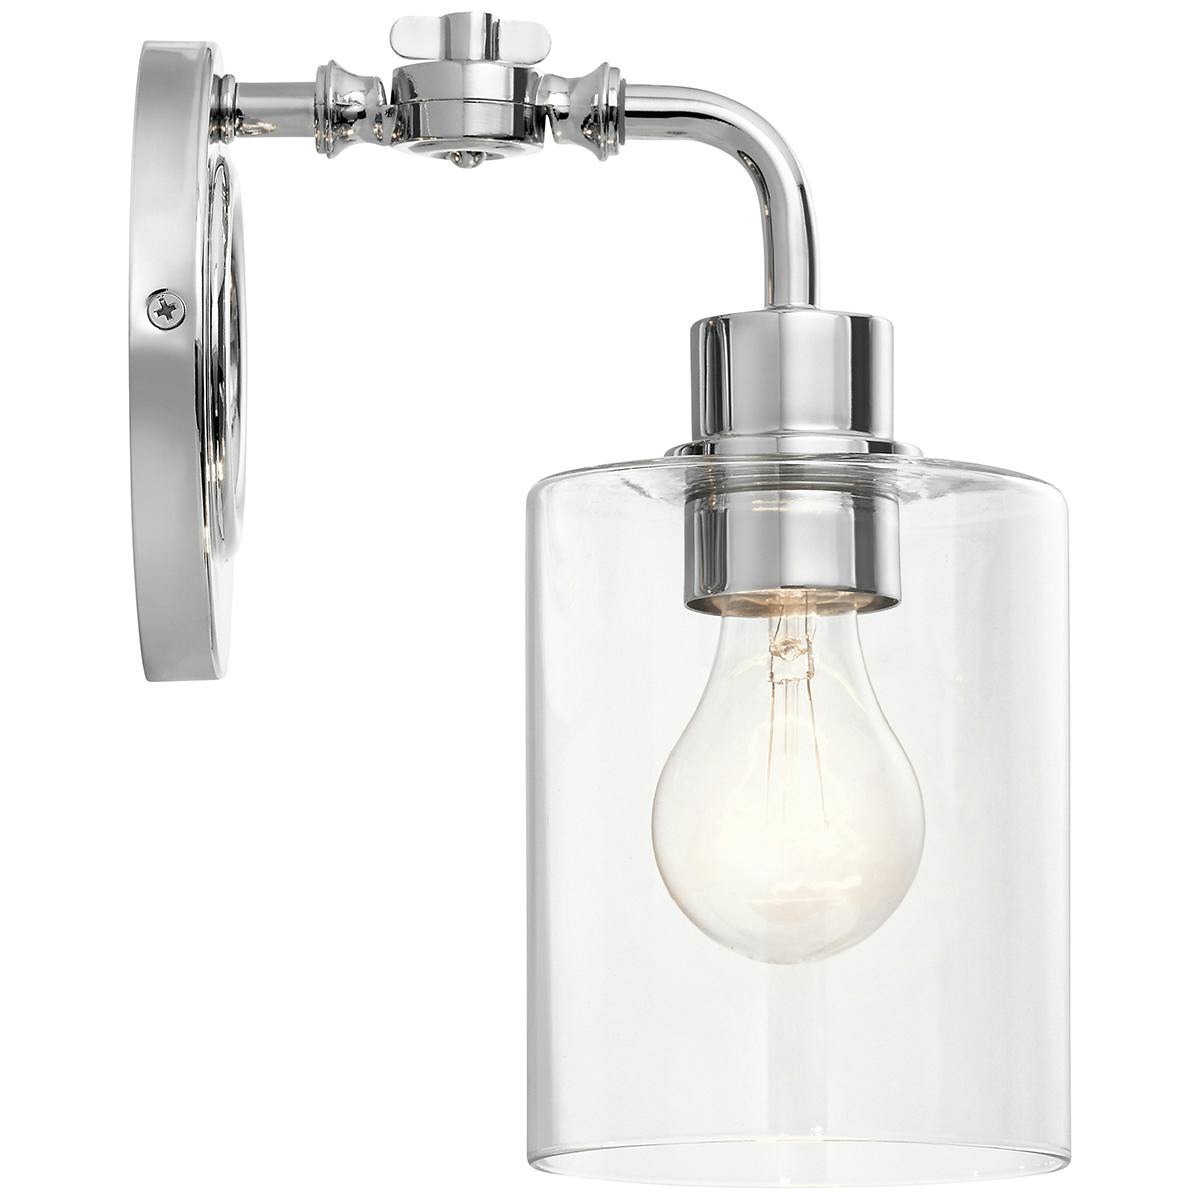 Profile view of the Gunnison™ 1 Light Wall Sconce Chrome on a white background